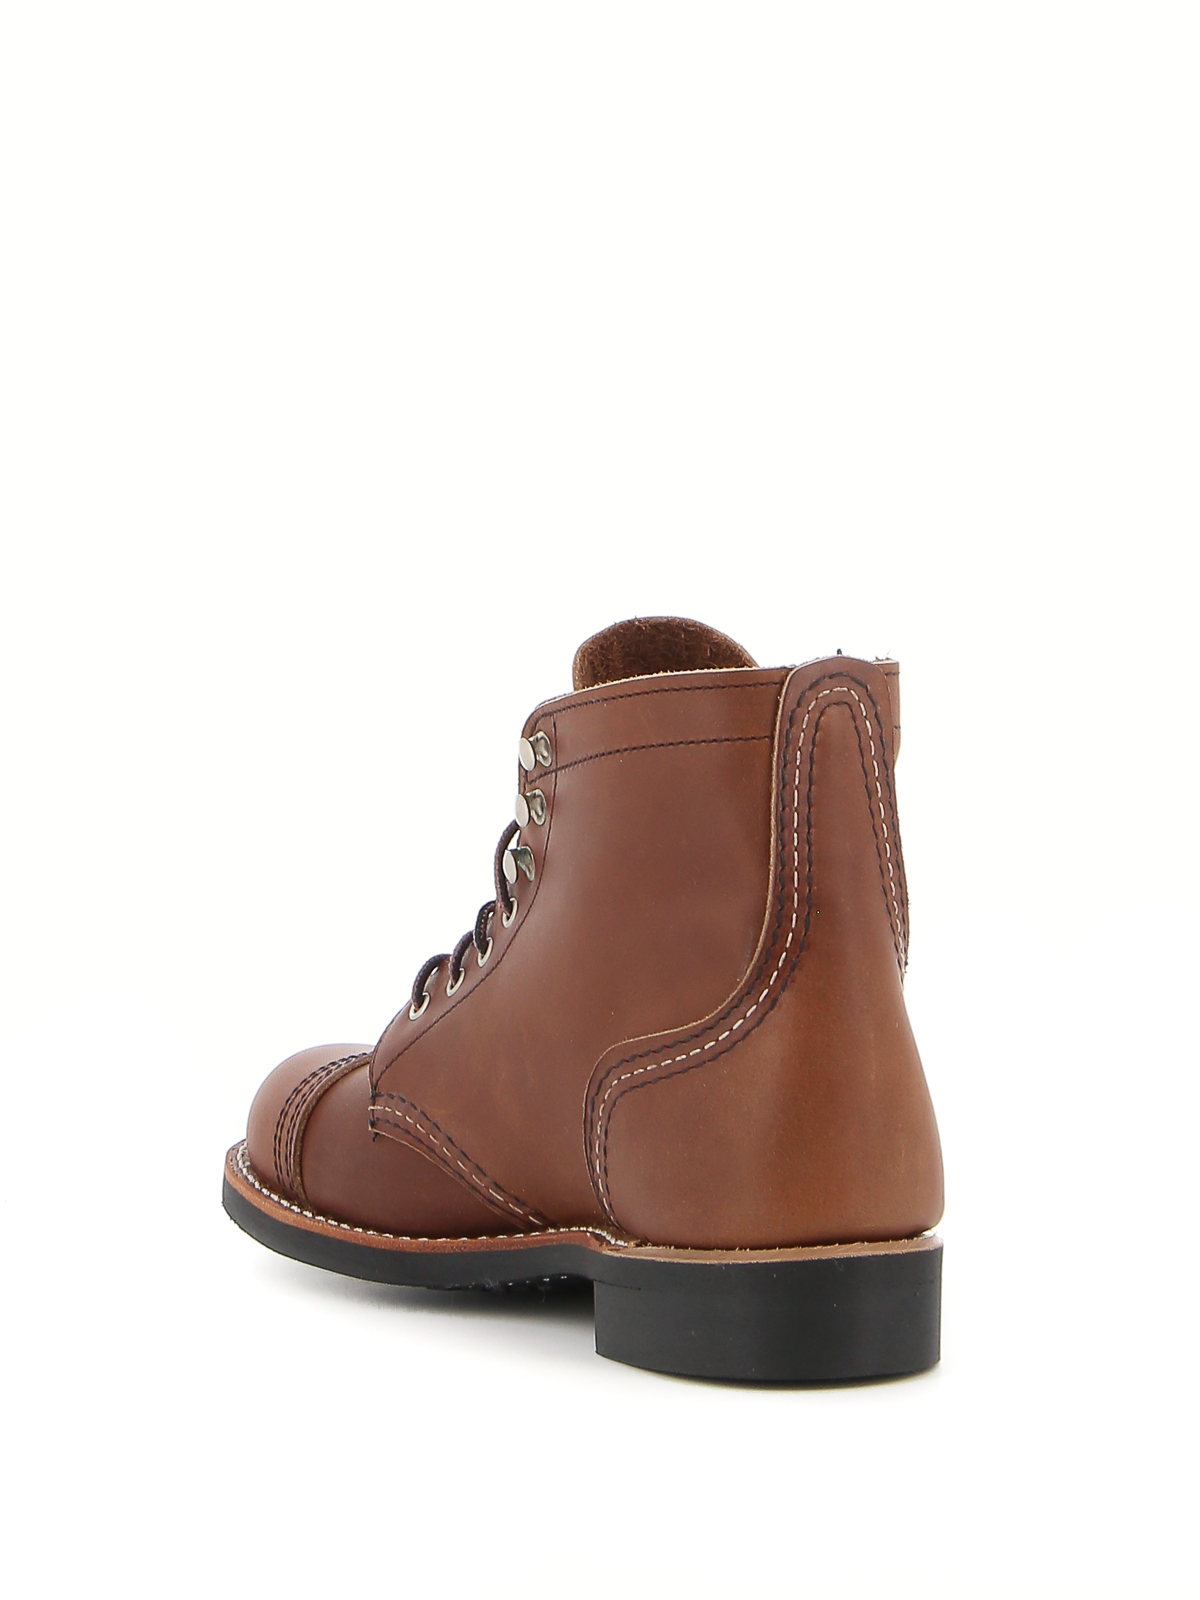 red wing boots buy online